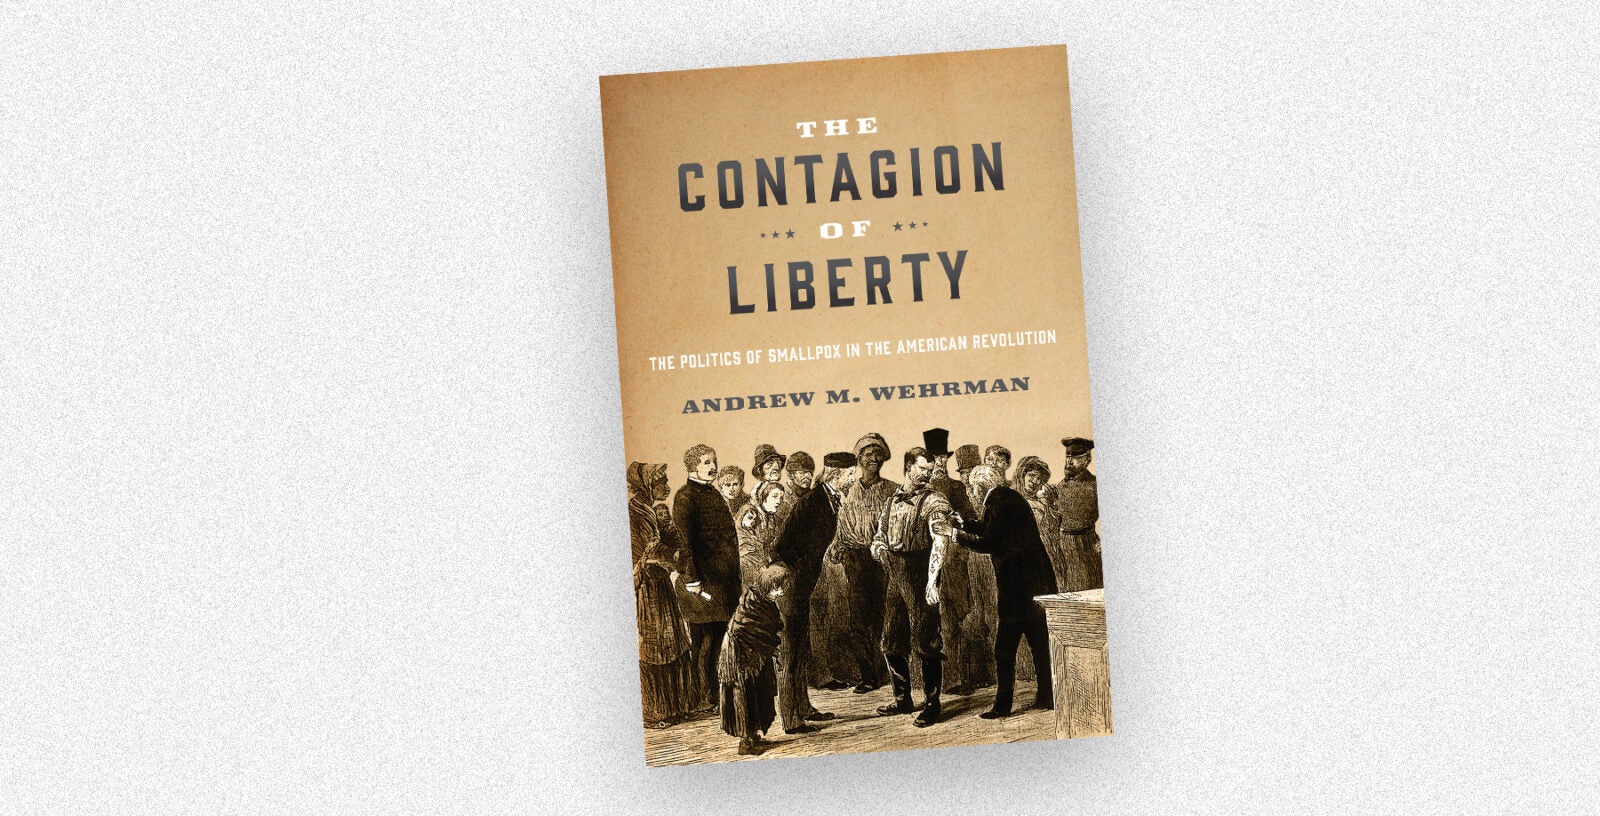 The book cover for "The Contagion of Liberty" by Andrew Wehrman rests on a white-speckled background.